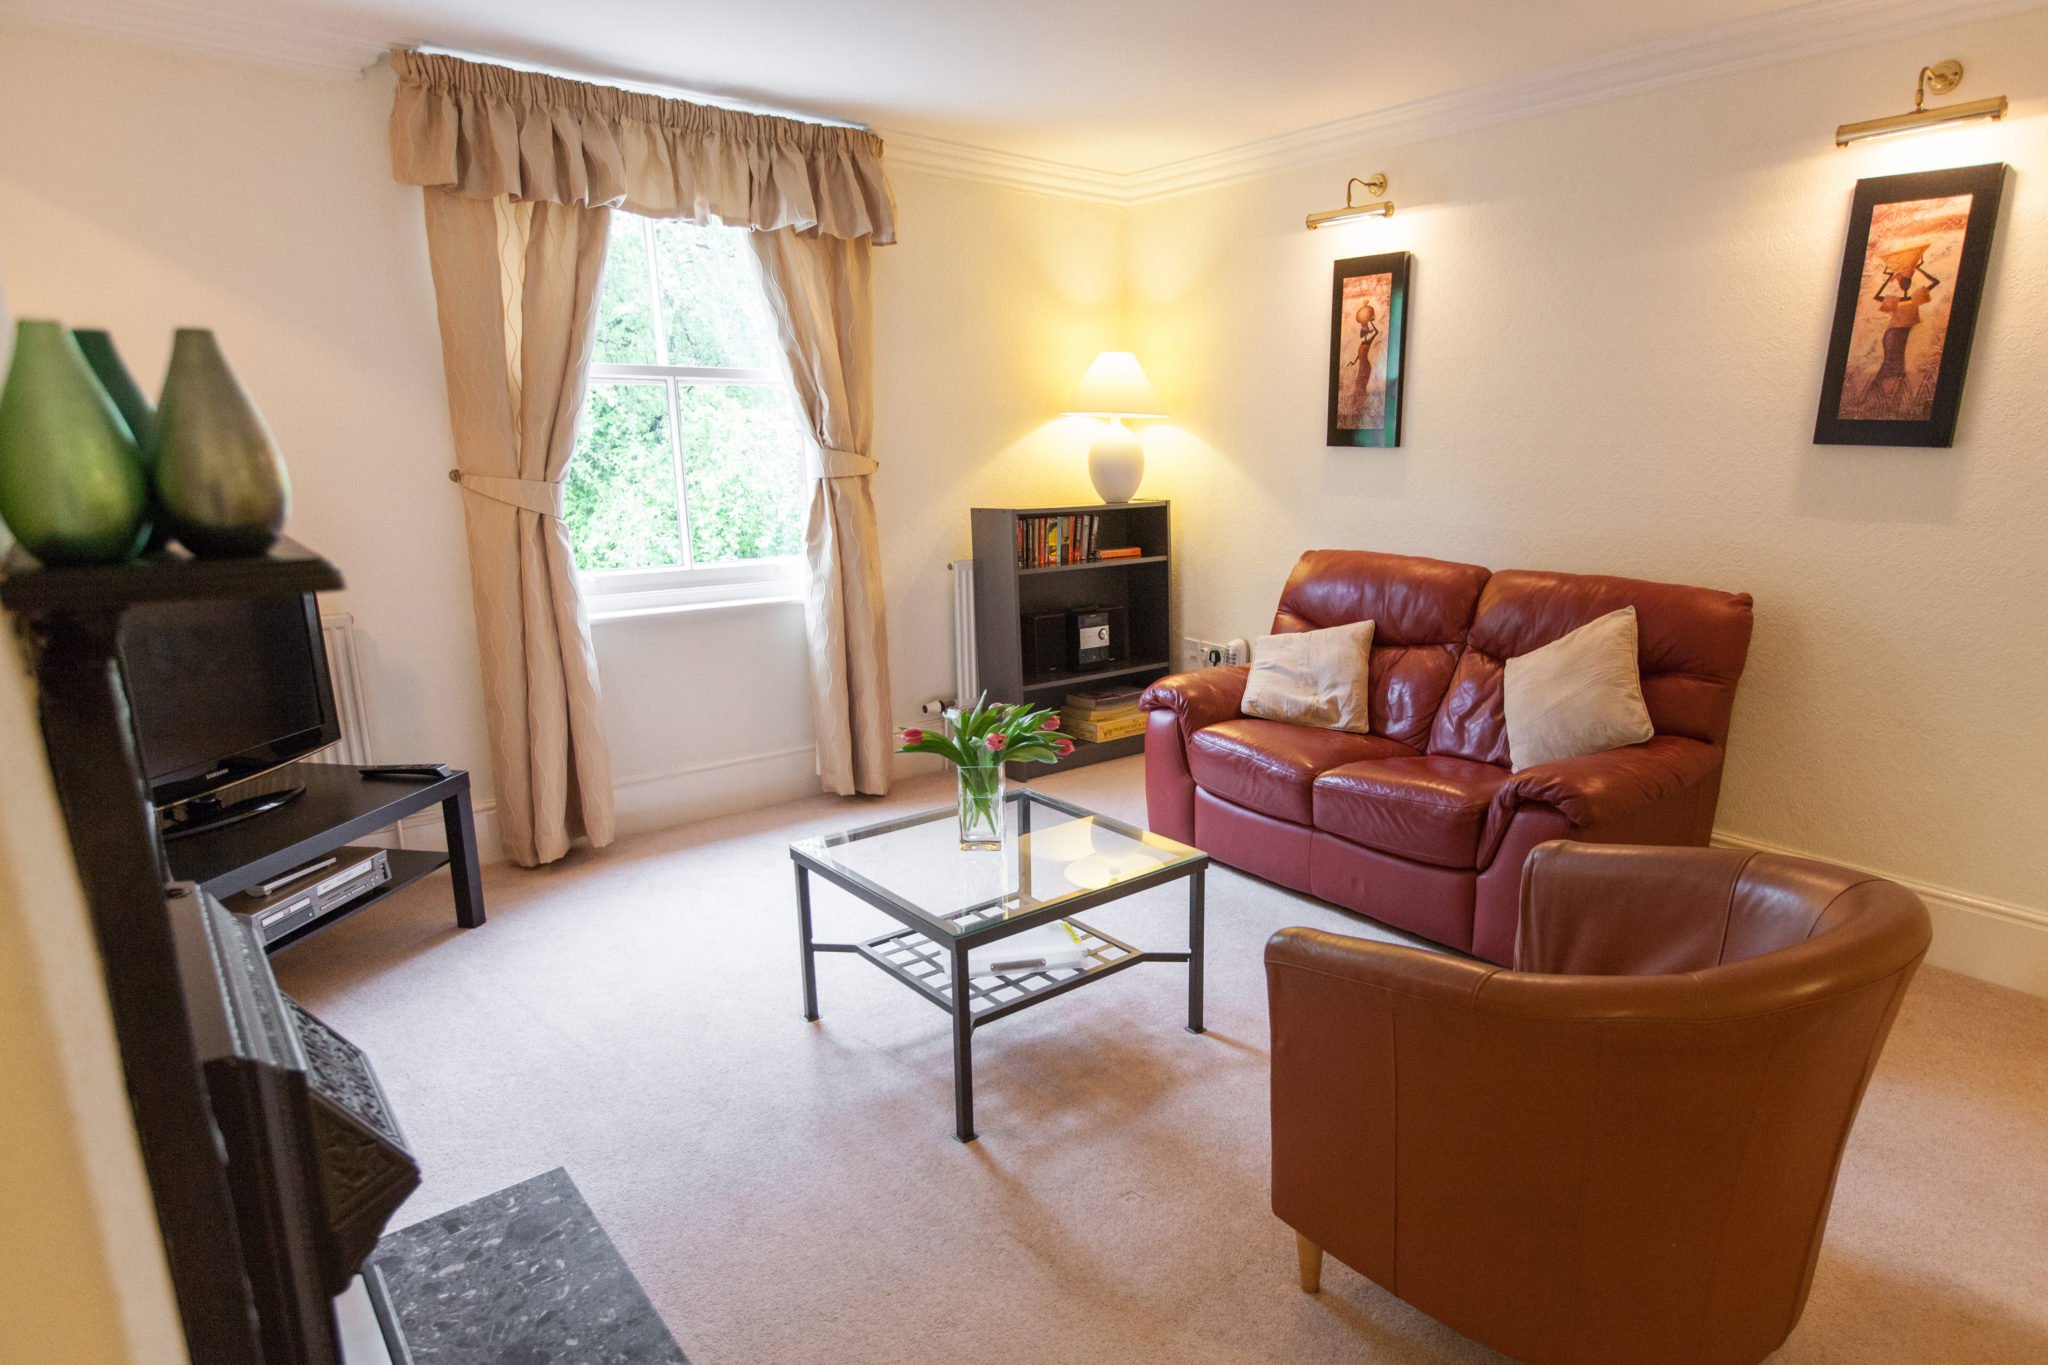 Knutsford Serviced Apartments Cheshire available now! North England Serviced Accommodation Manchester Airport - Urban Stay